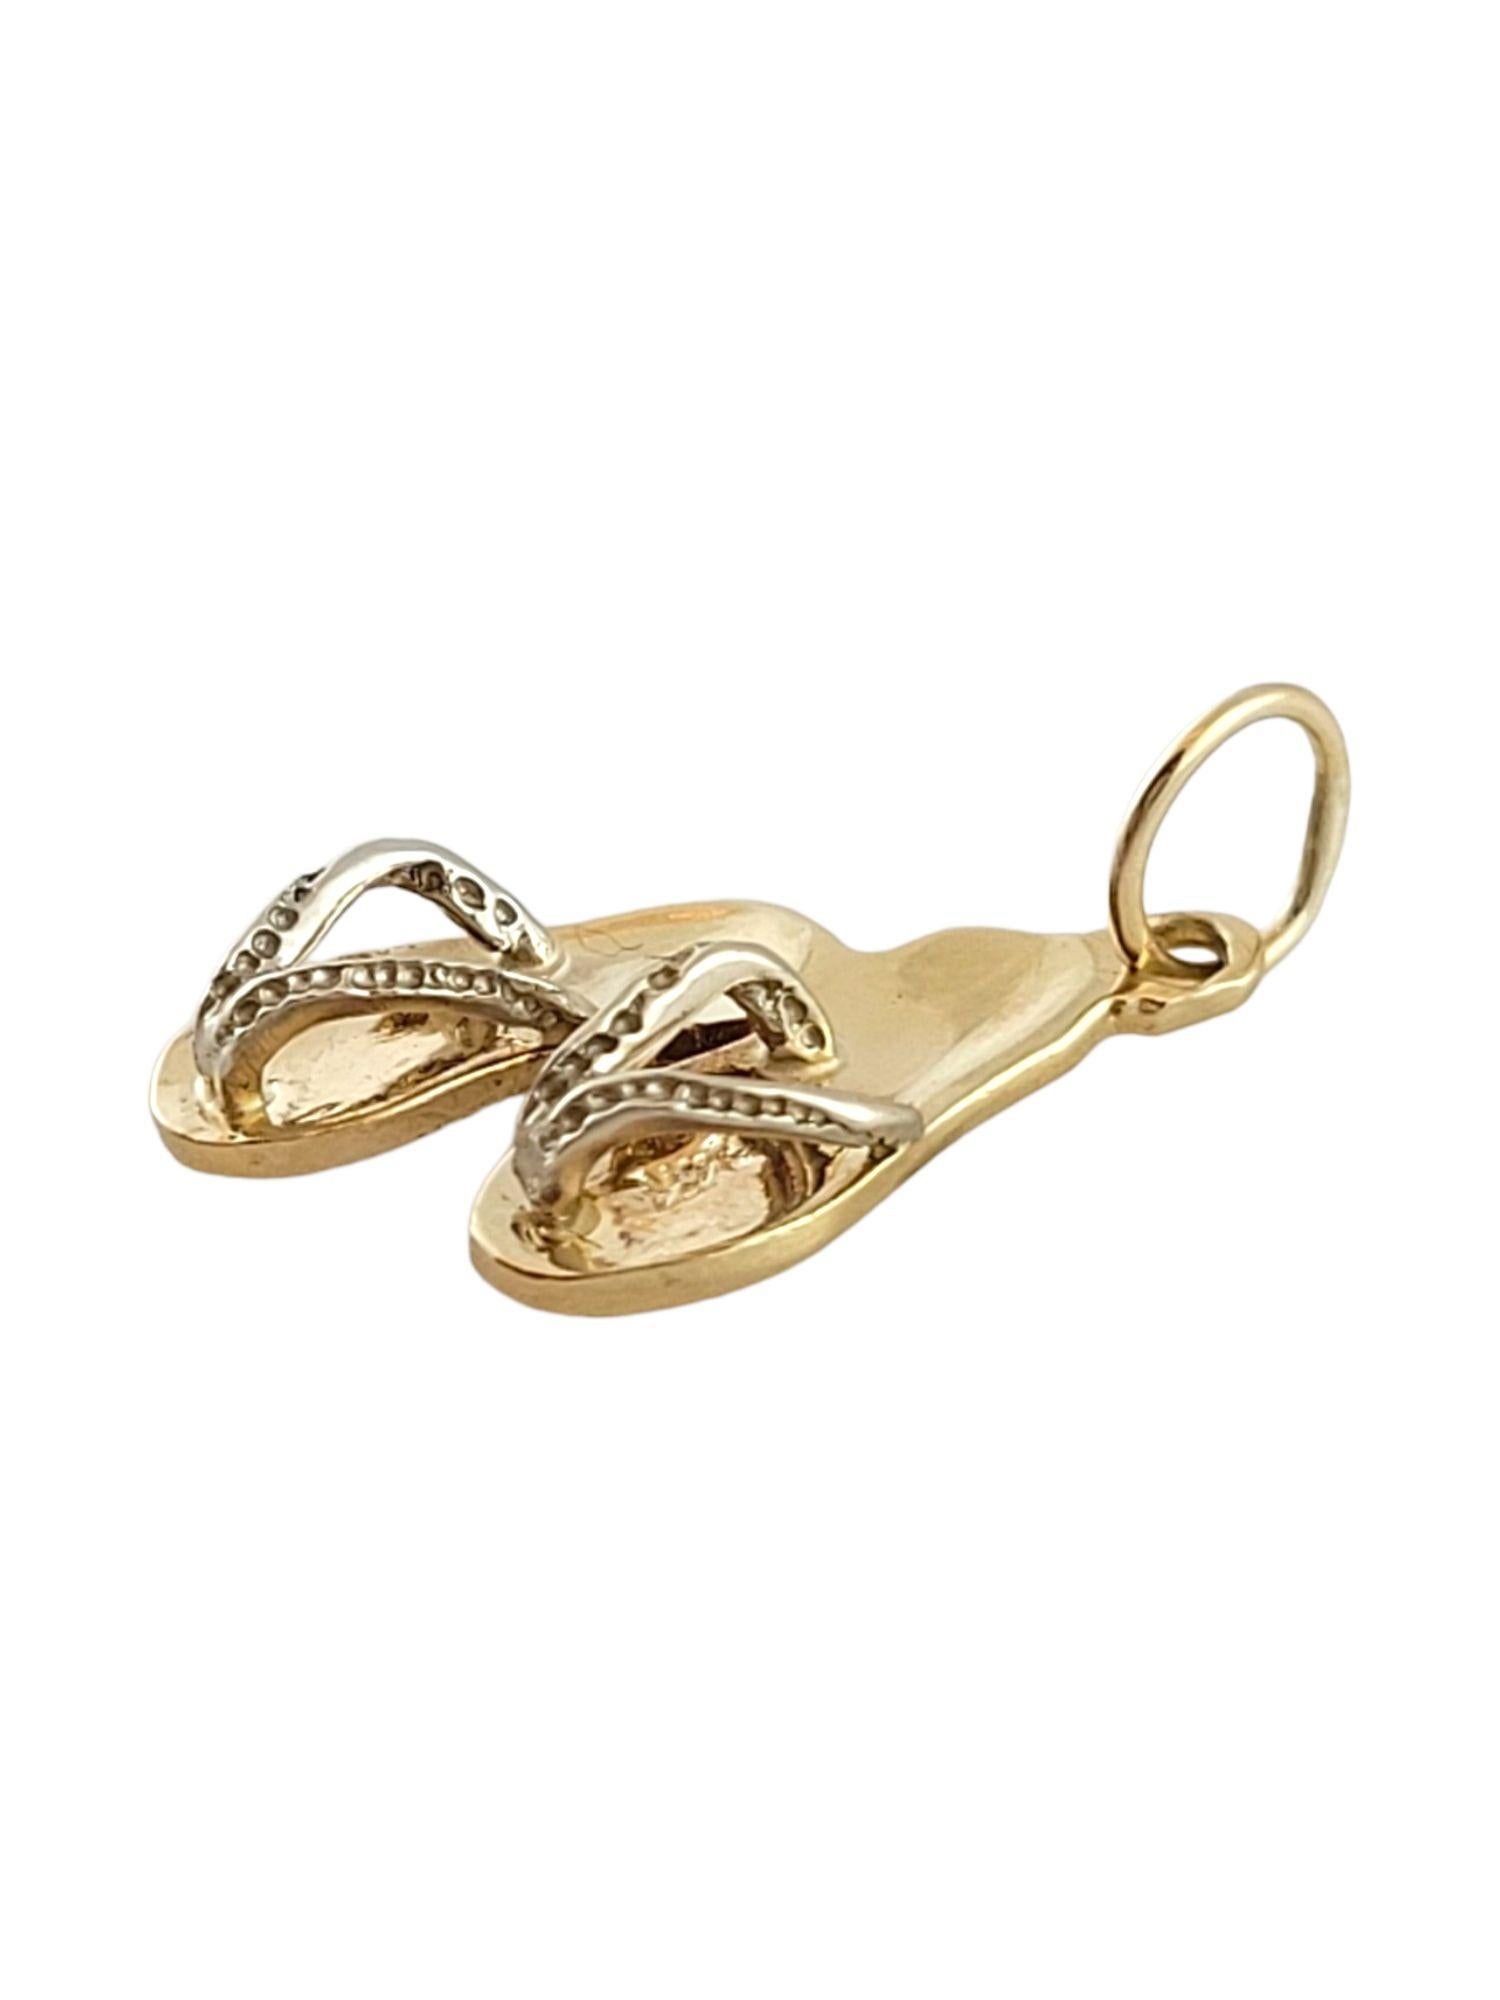 Vintage 10K Yellow Gold Flip Flops Charm

10K yellow gold charm featuring adorable set of flip flops!

Size: 18.0mm X 9.7mm X 3.6mm

Length w/ bail: 22.3mm

Weight: 1.20 g/ 0.8 dwt

Tested 10K

Very good condition, professionally polished.

Will